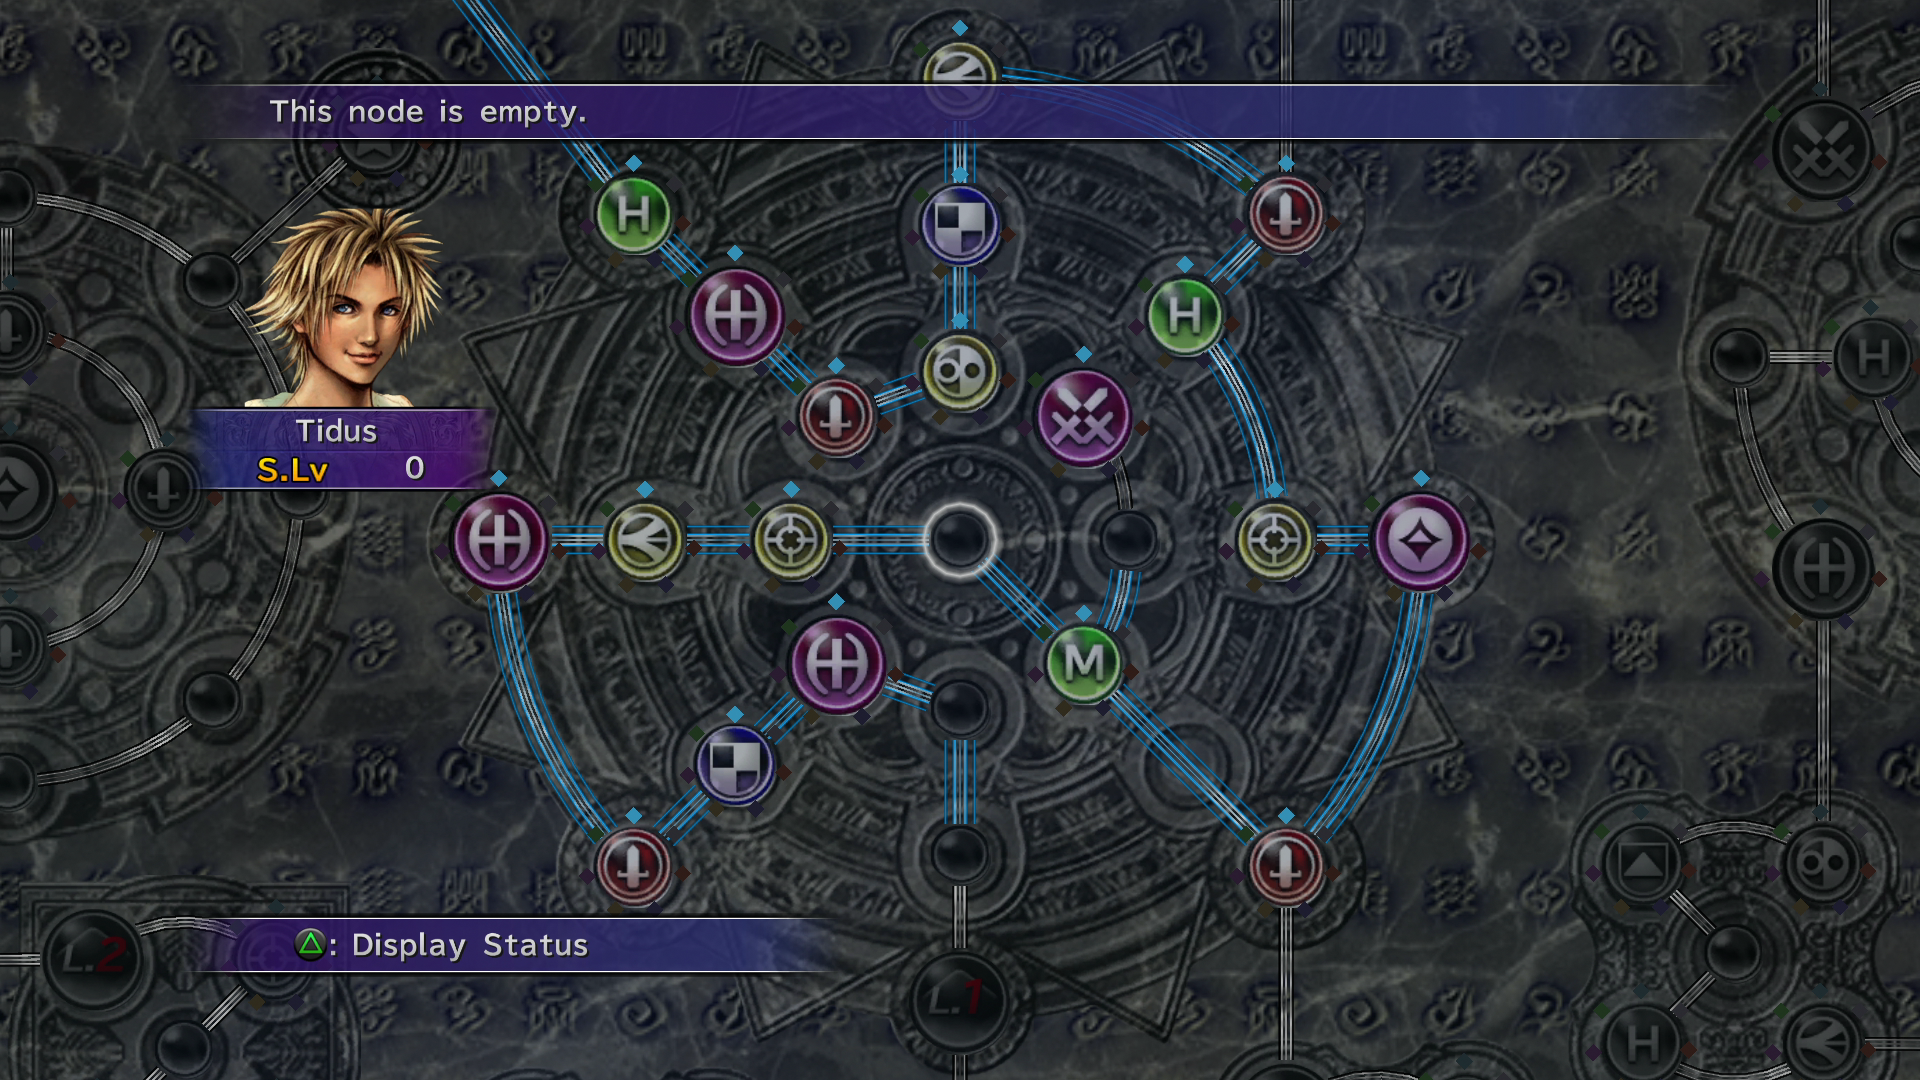 ffx-sphere-grid-guide-hd-max-stats.png